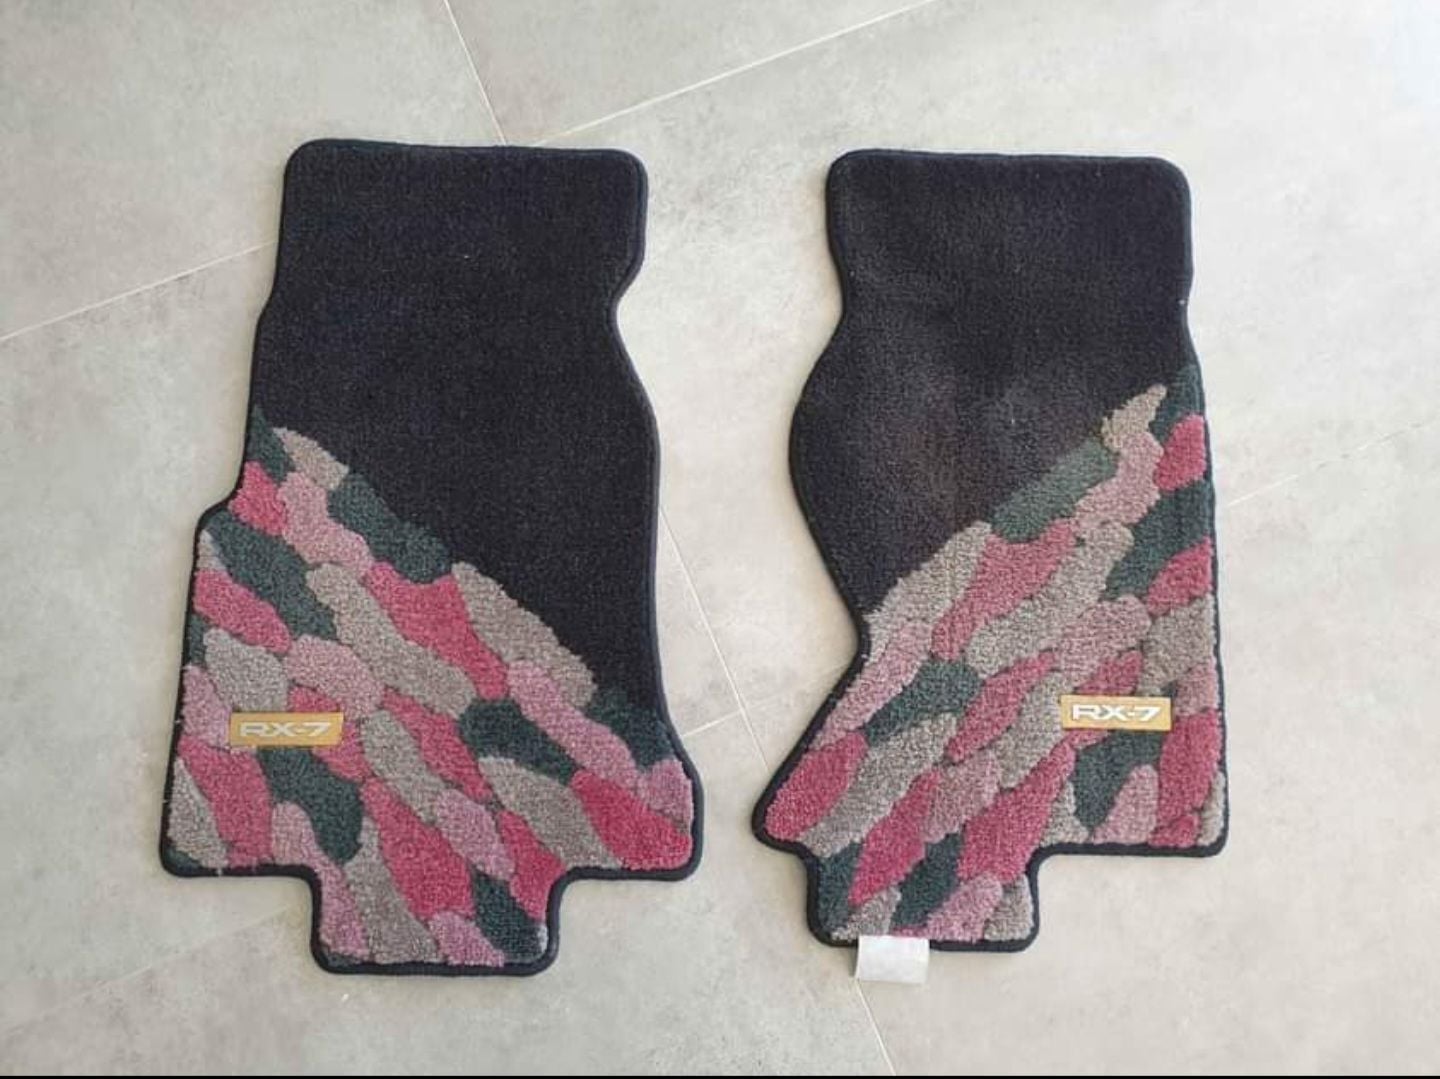 Interior/Upholstery - ISO of JDM floor mats - Used - Indianapolis, IN 46077, United States